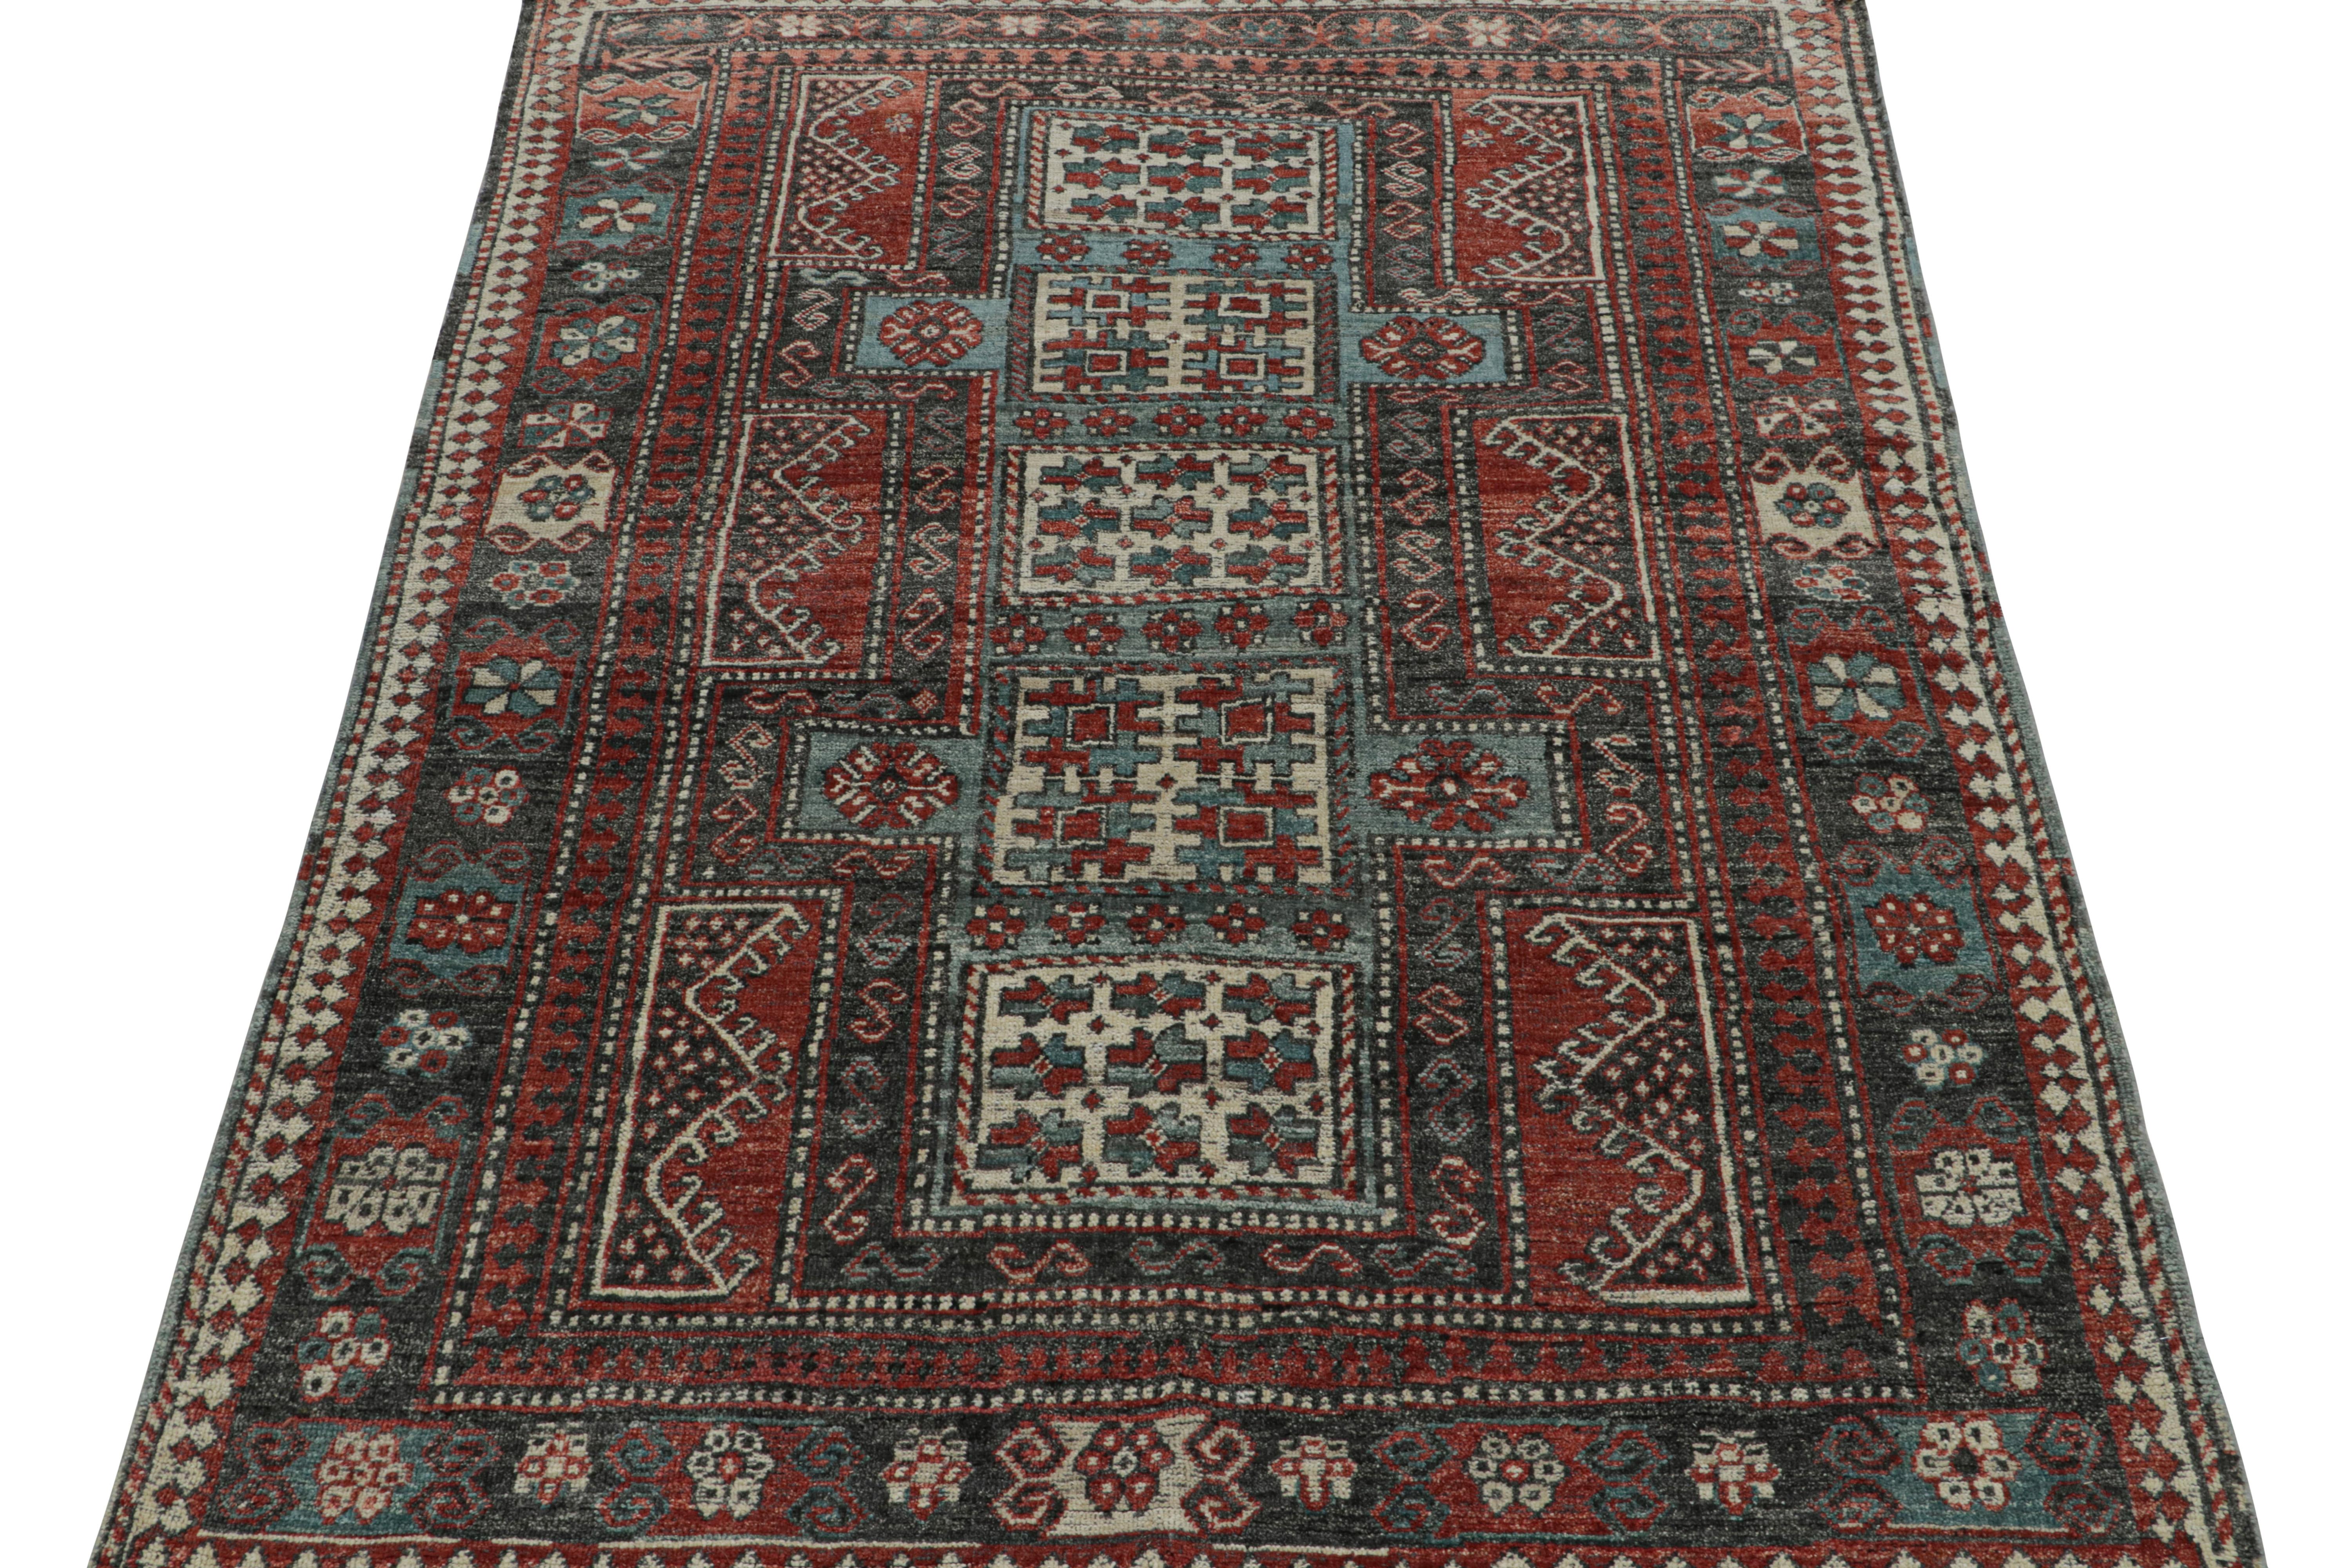 Indian Rug & Kilim’s Tribal Style Rug in Red, Blue & Black Geometric Patterns For Sale